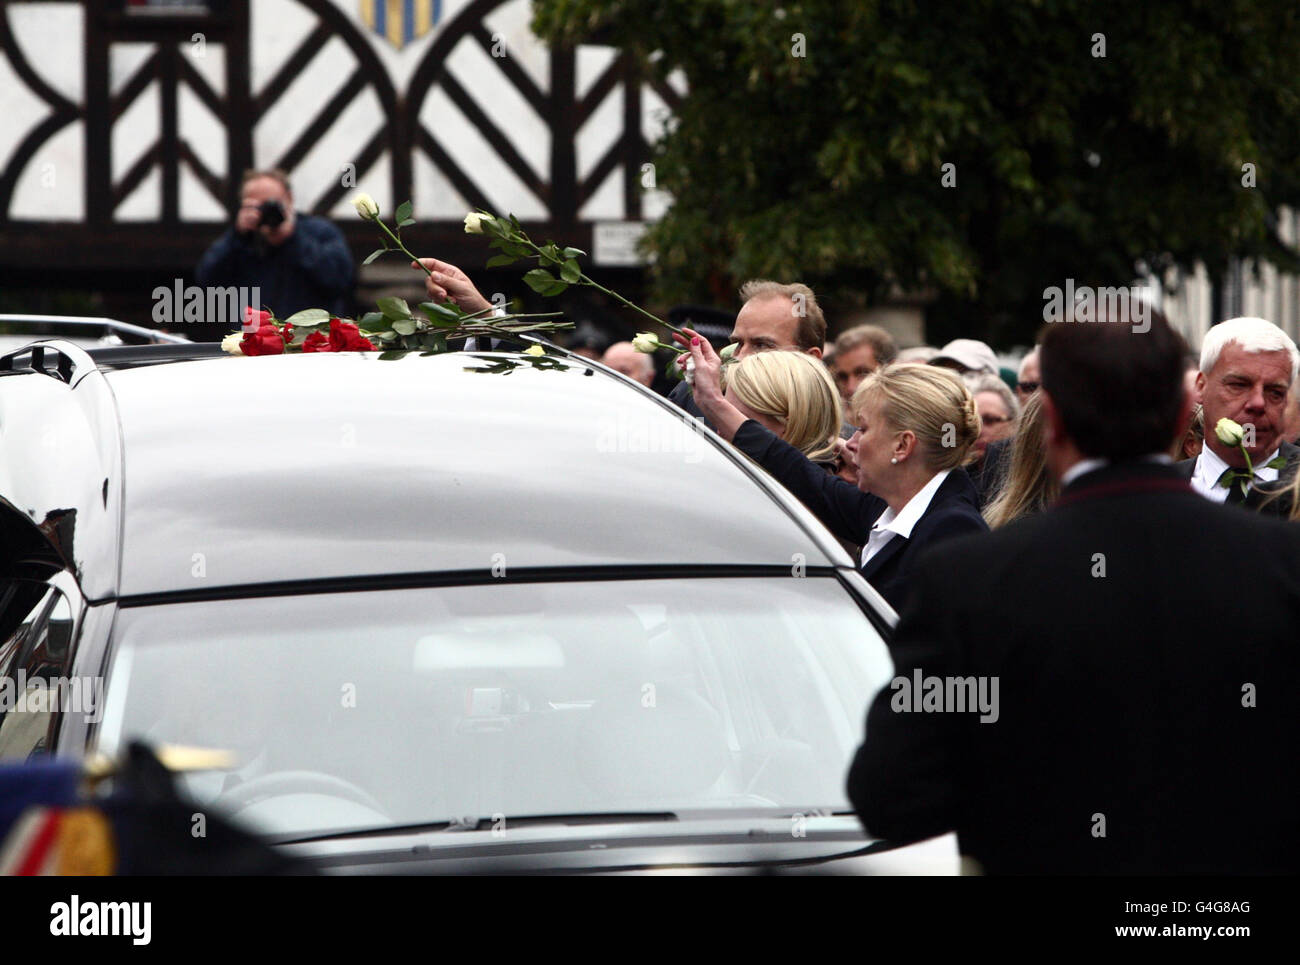 Friends and family places flowers on top of the hearse carrying the coffin of Lieutenant Daniel Clack it passes through Wootton Bassett, Wiltshire, following his Repatriation. Stock Photo